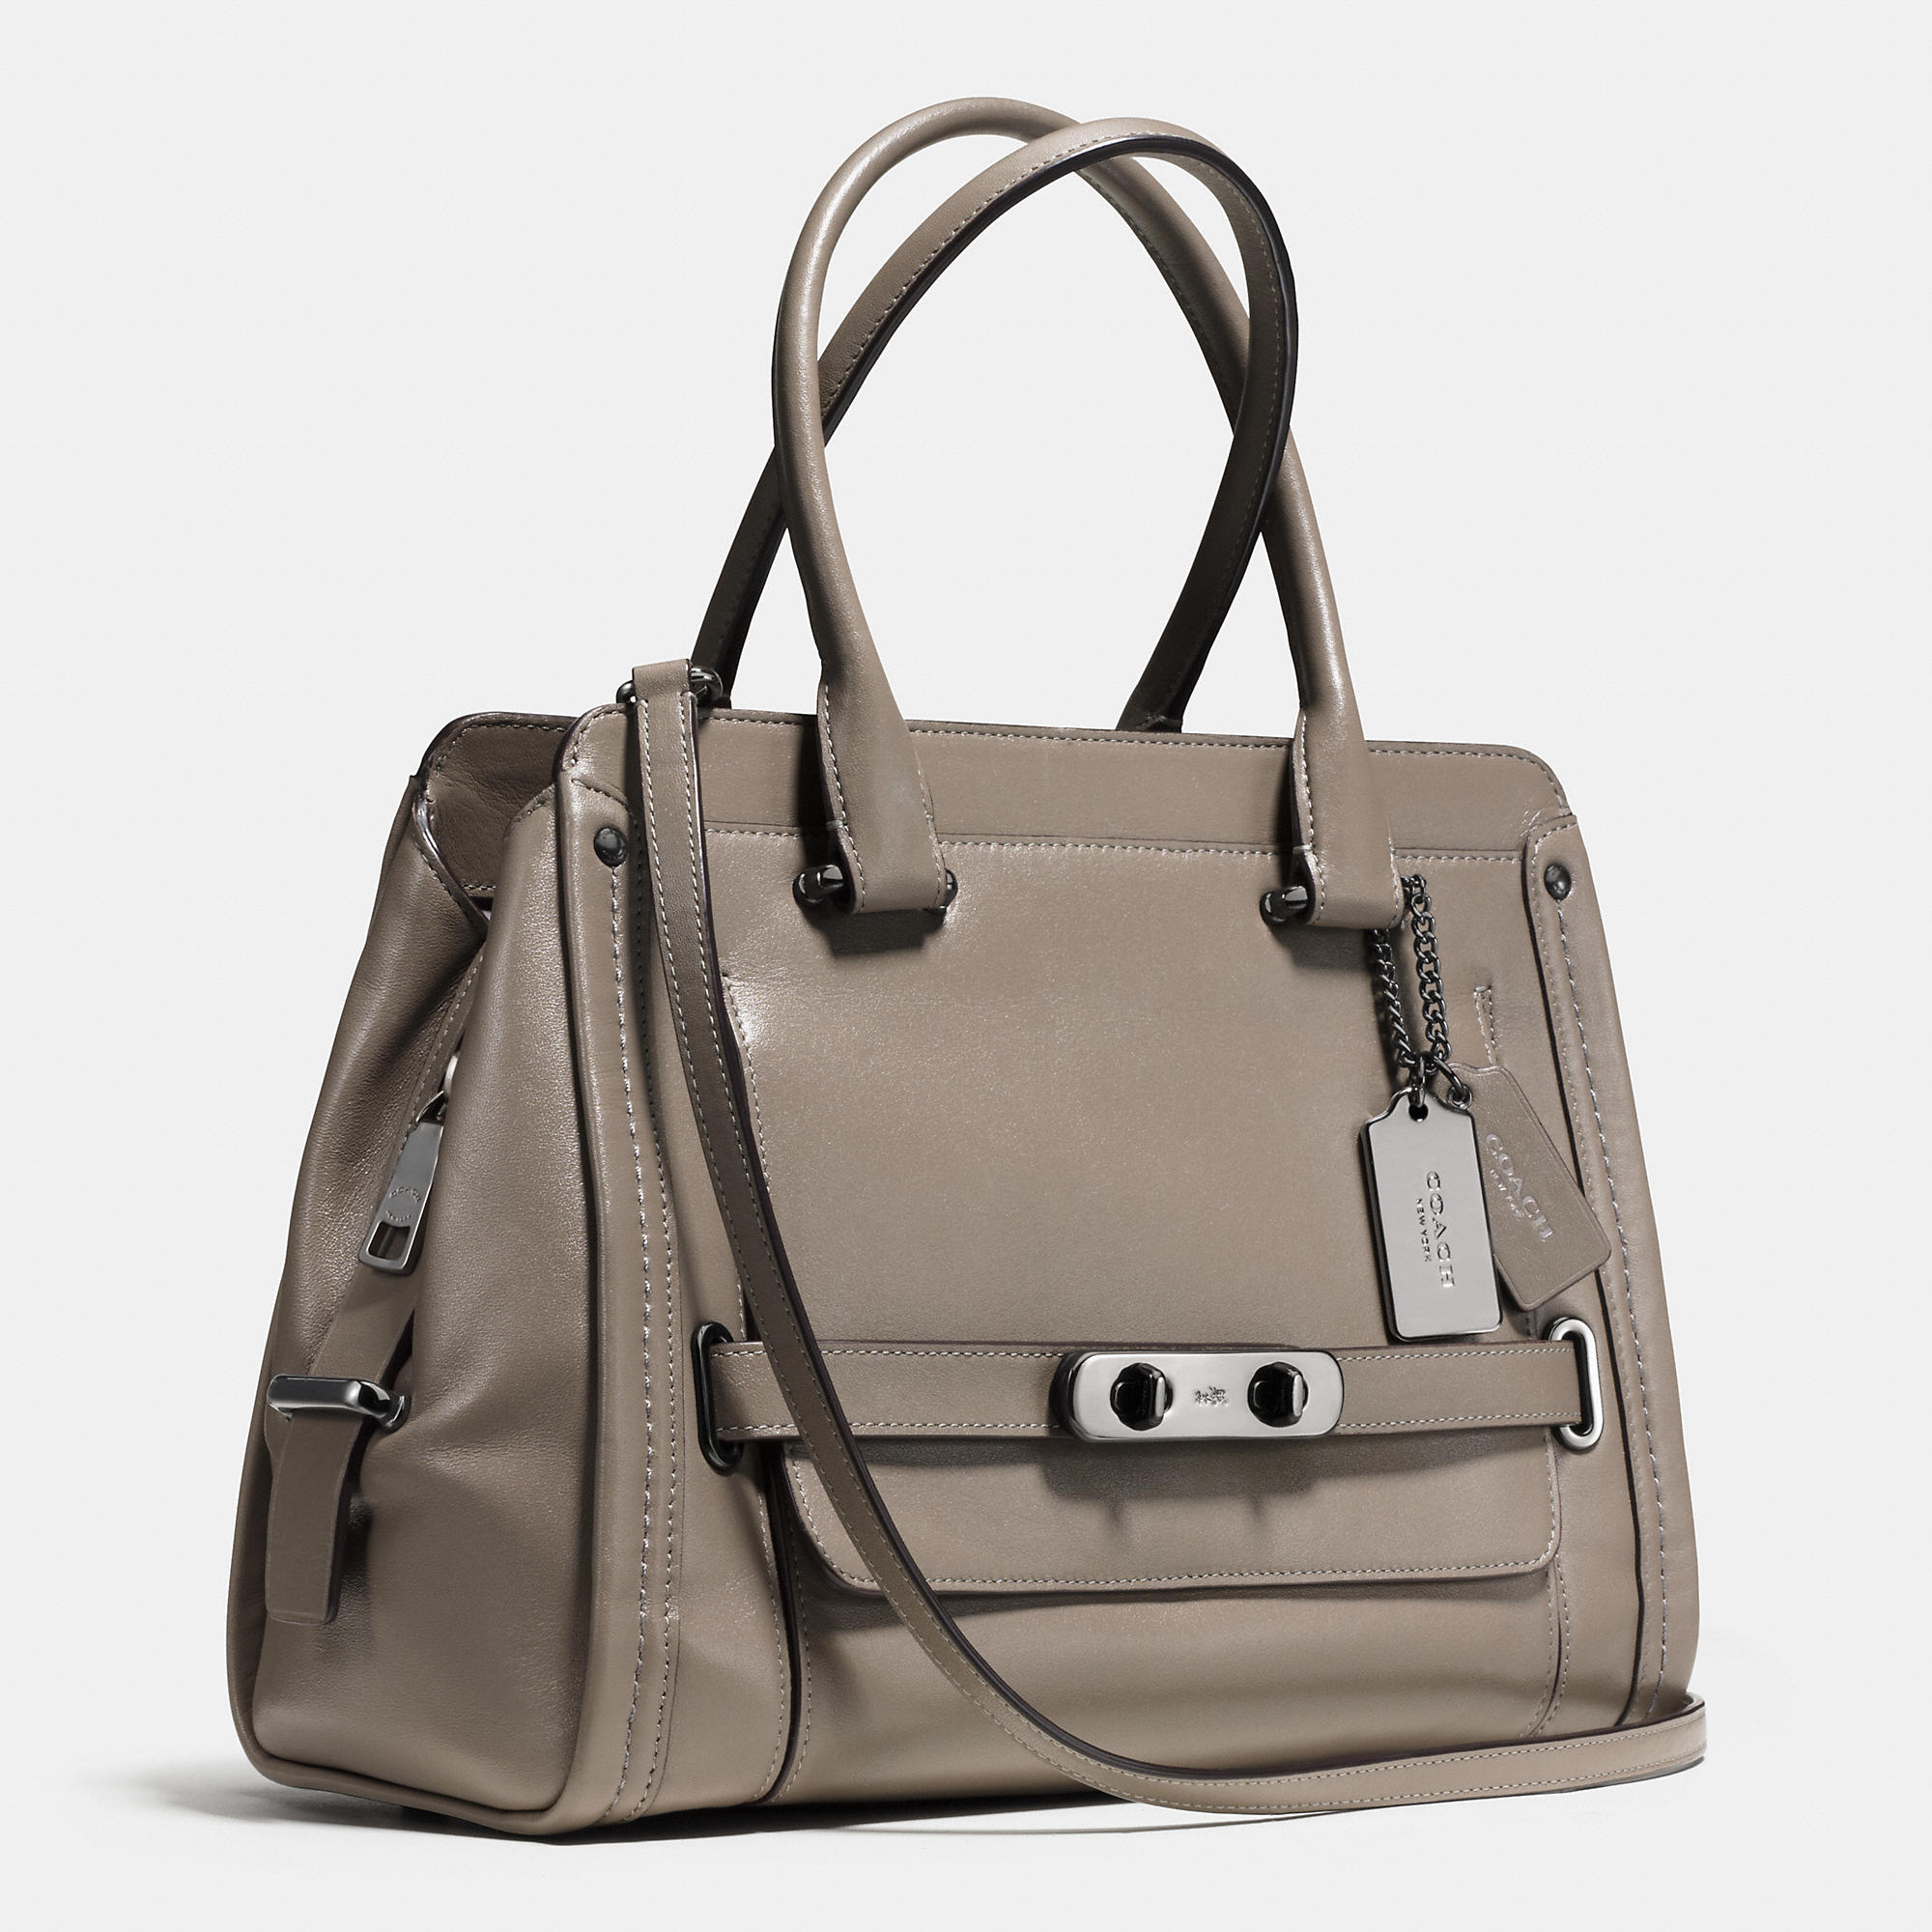 Leisure Fashion Coach Swagger Frame Satchel In Calf Leather